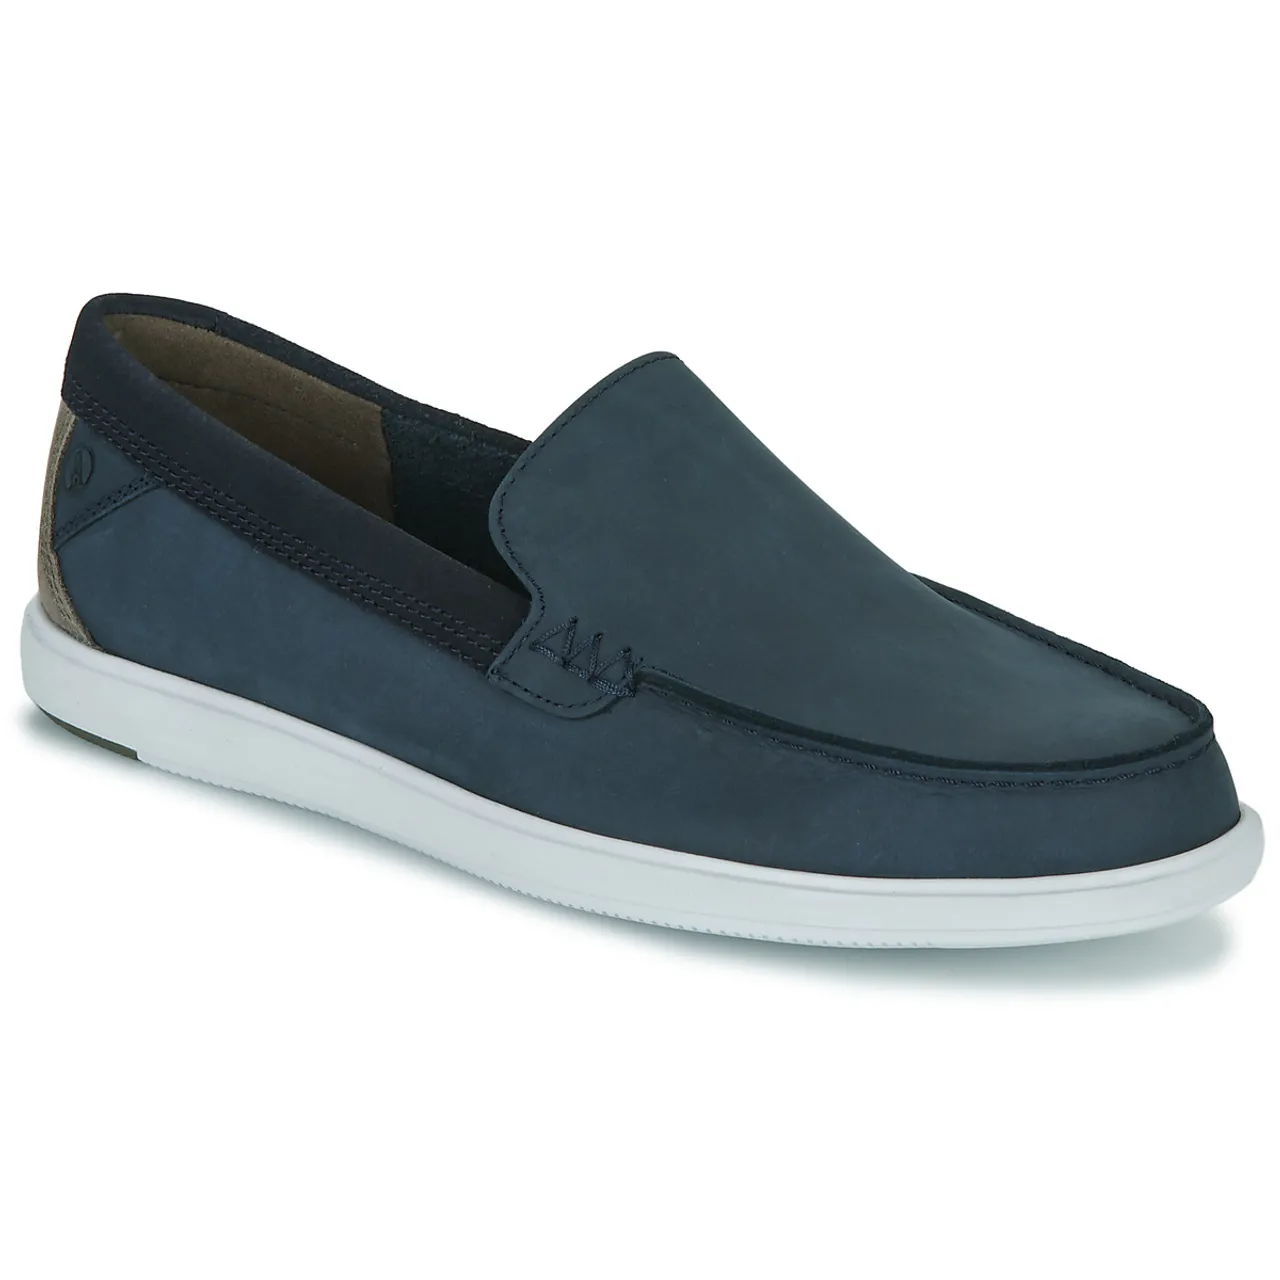 Clarks  BRATTON LOAFER  men's Boat Shoes in Marine